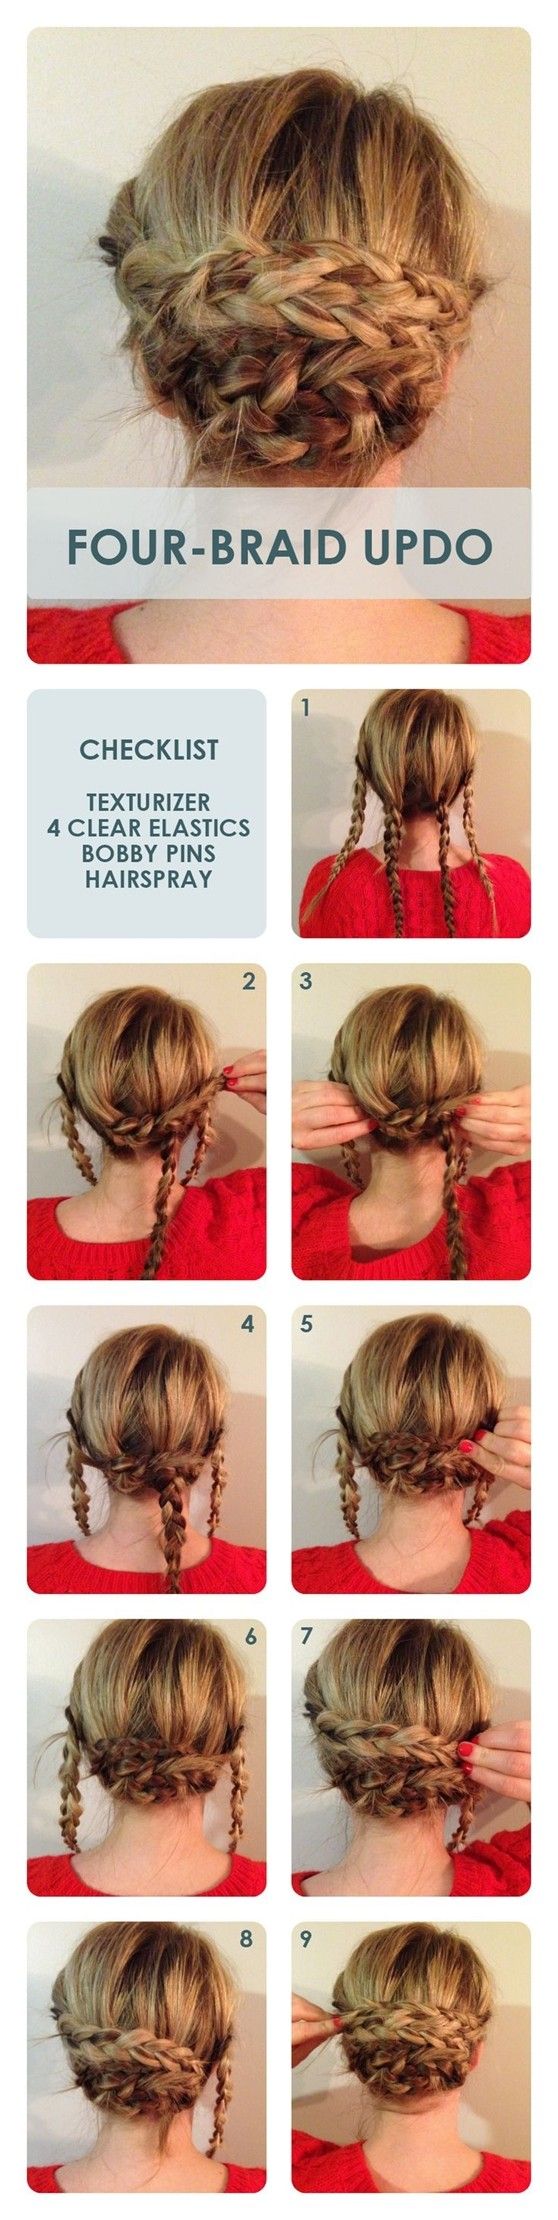 Updo hairstyle with four braids